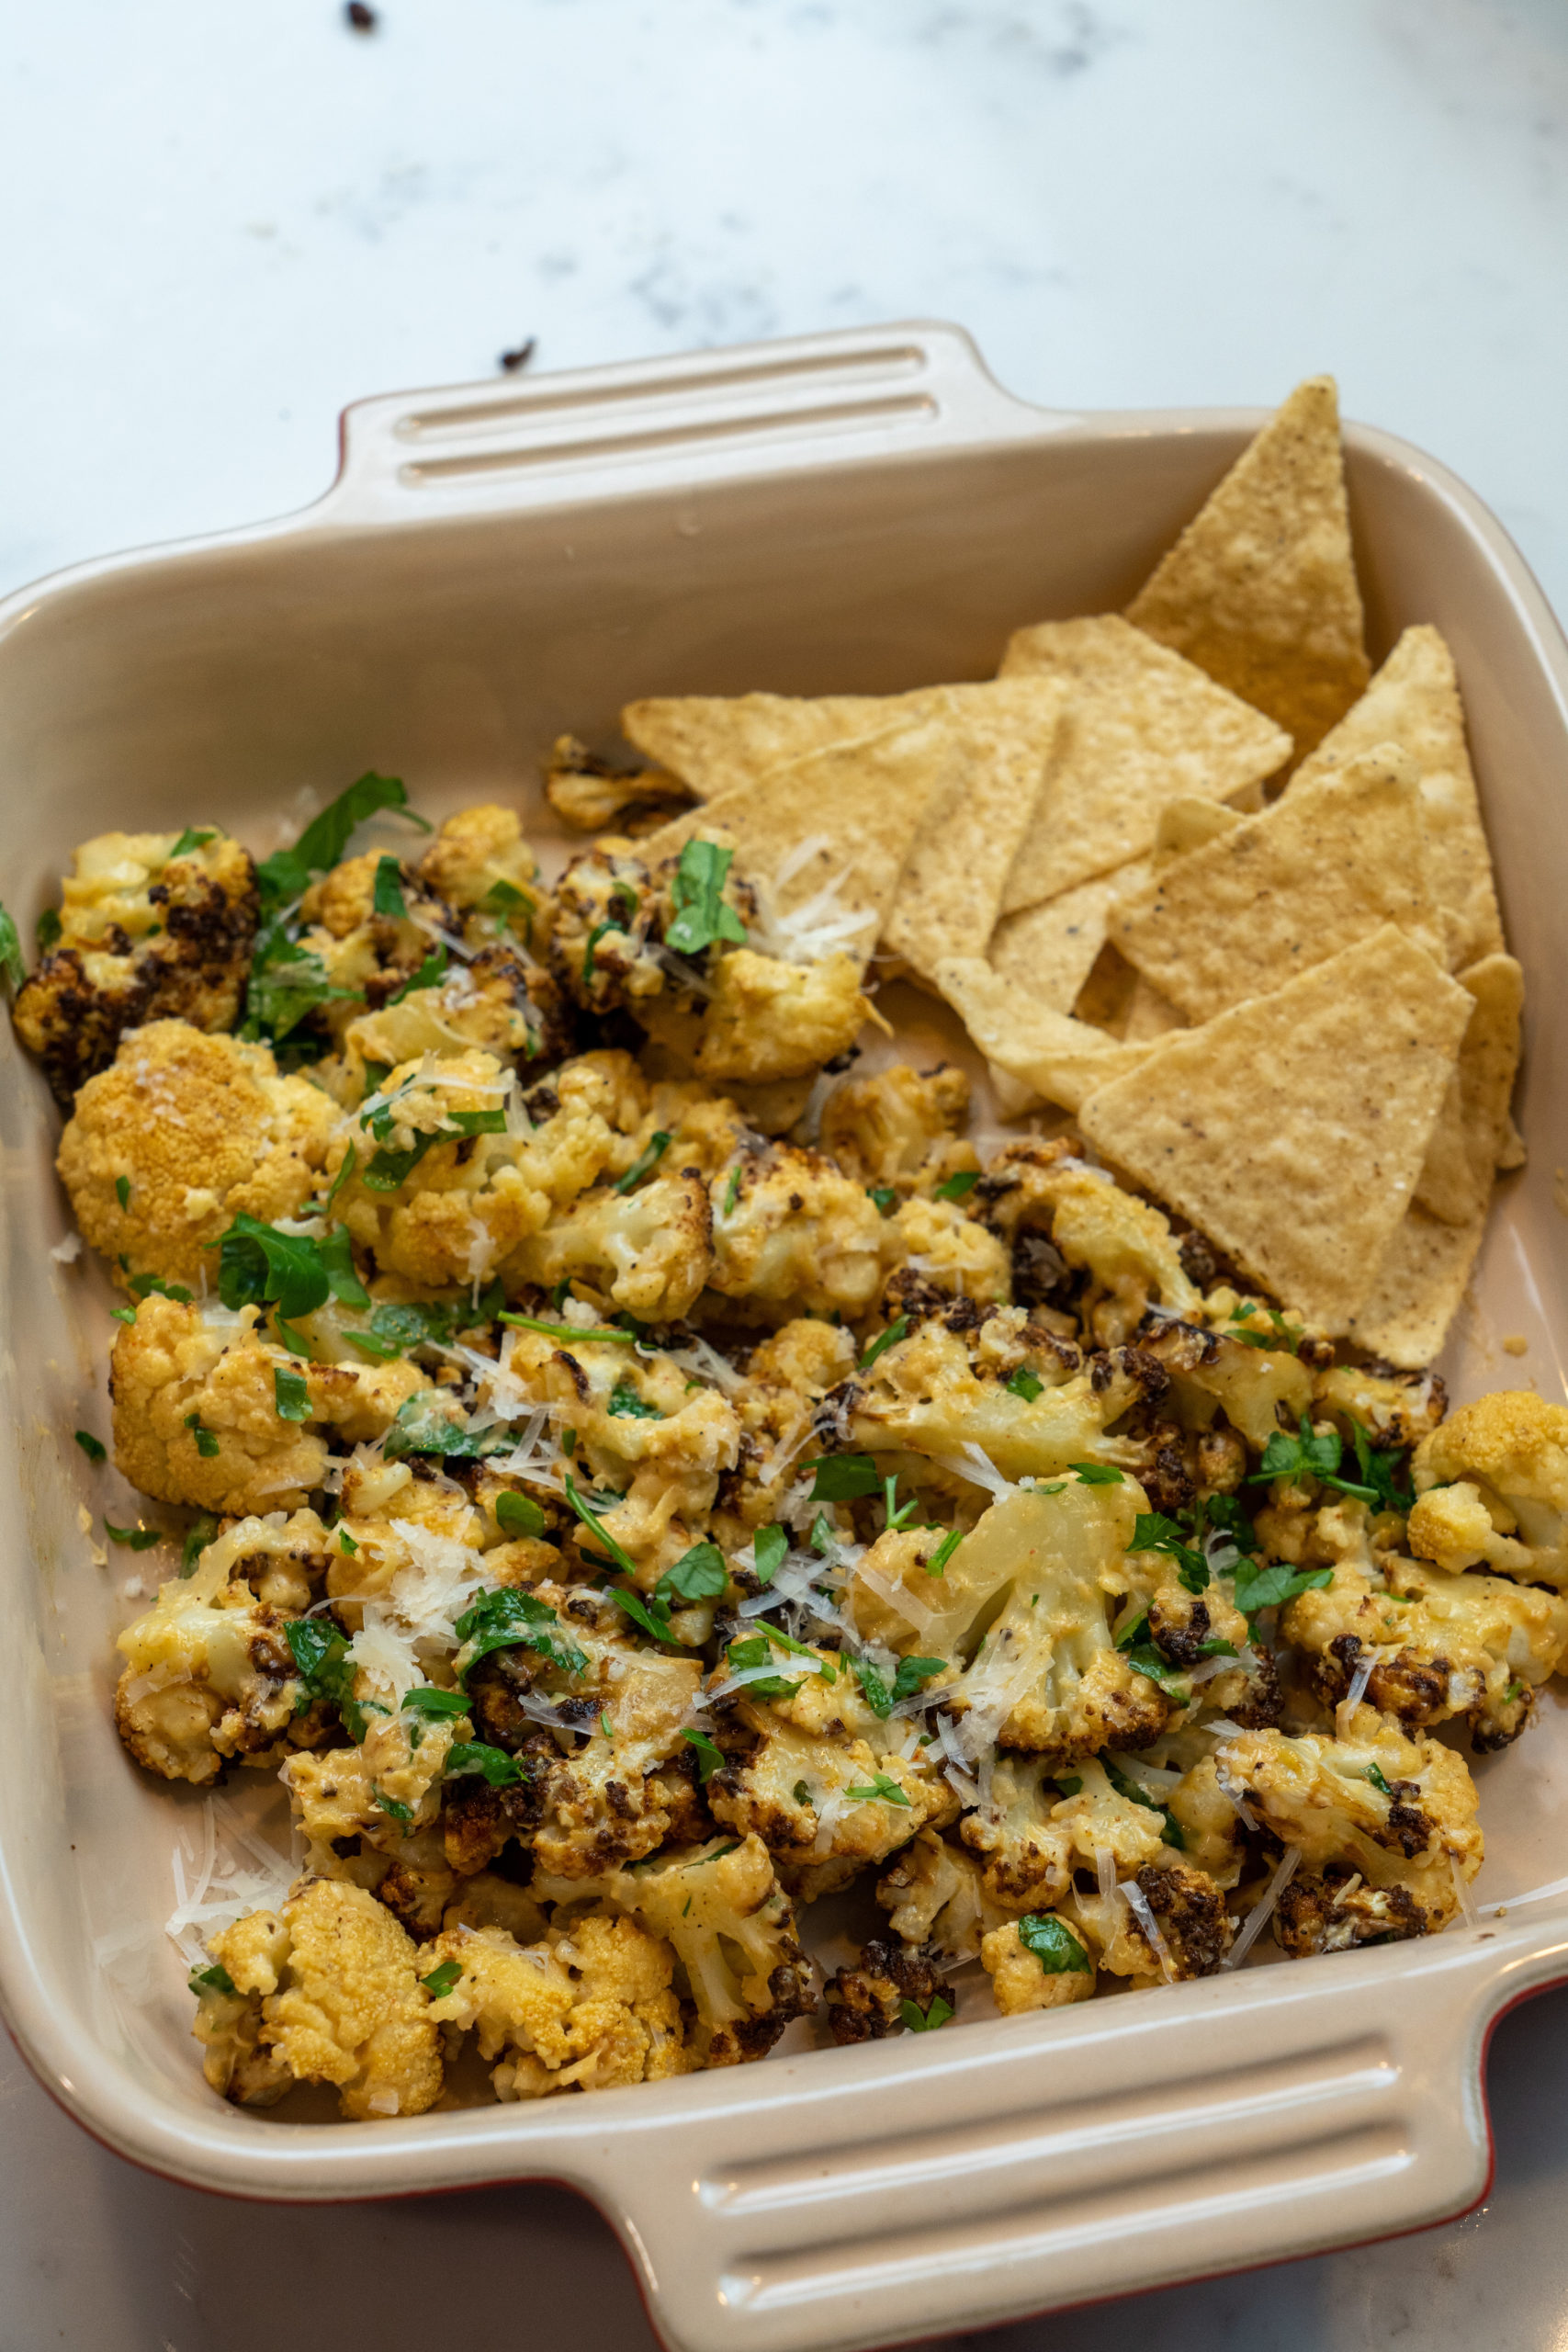 This Mexican Cauliflower will be good in the refrigerator for 2-3 days.